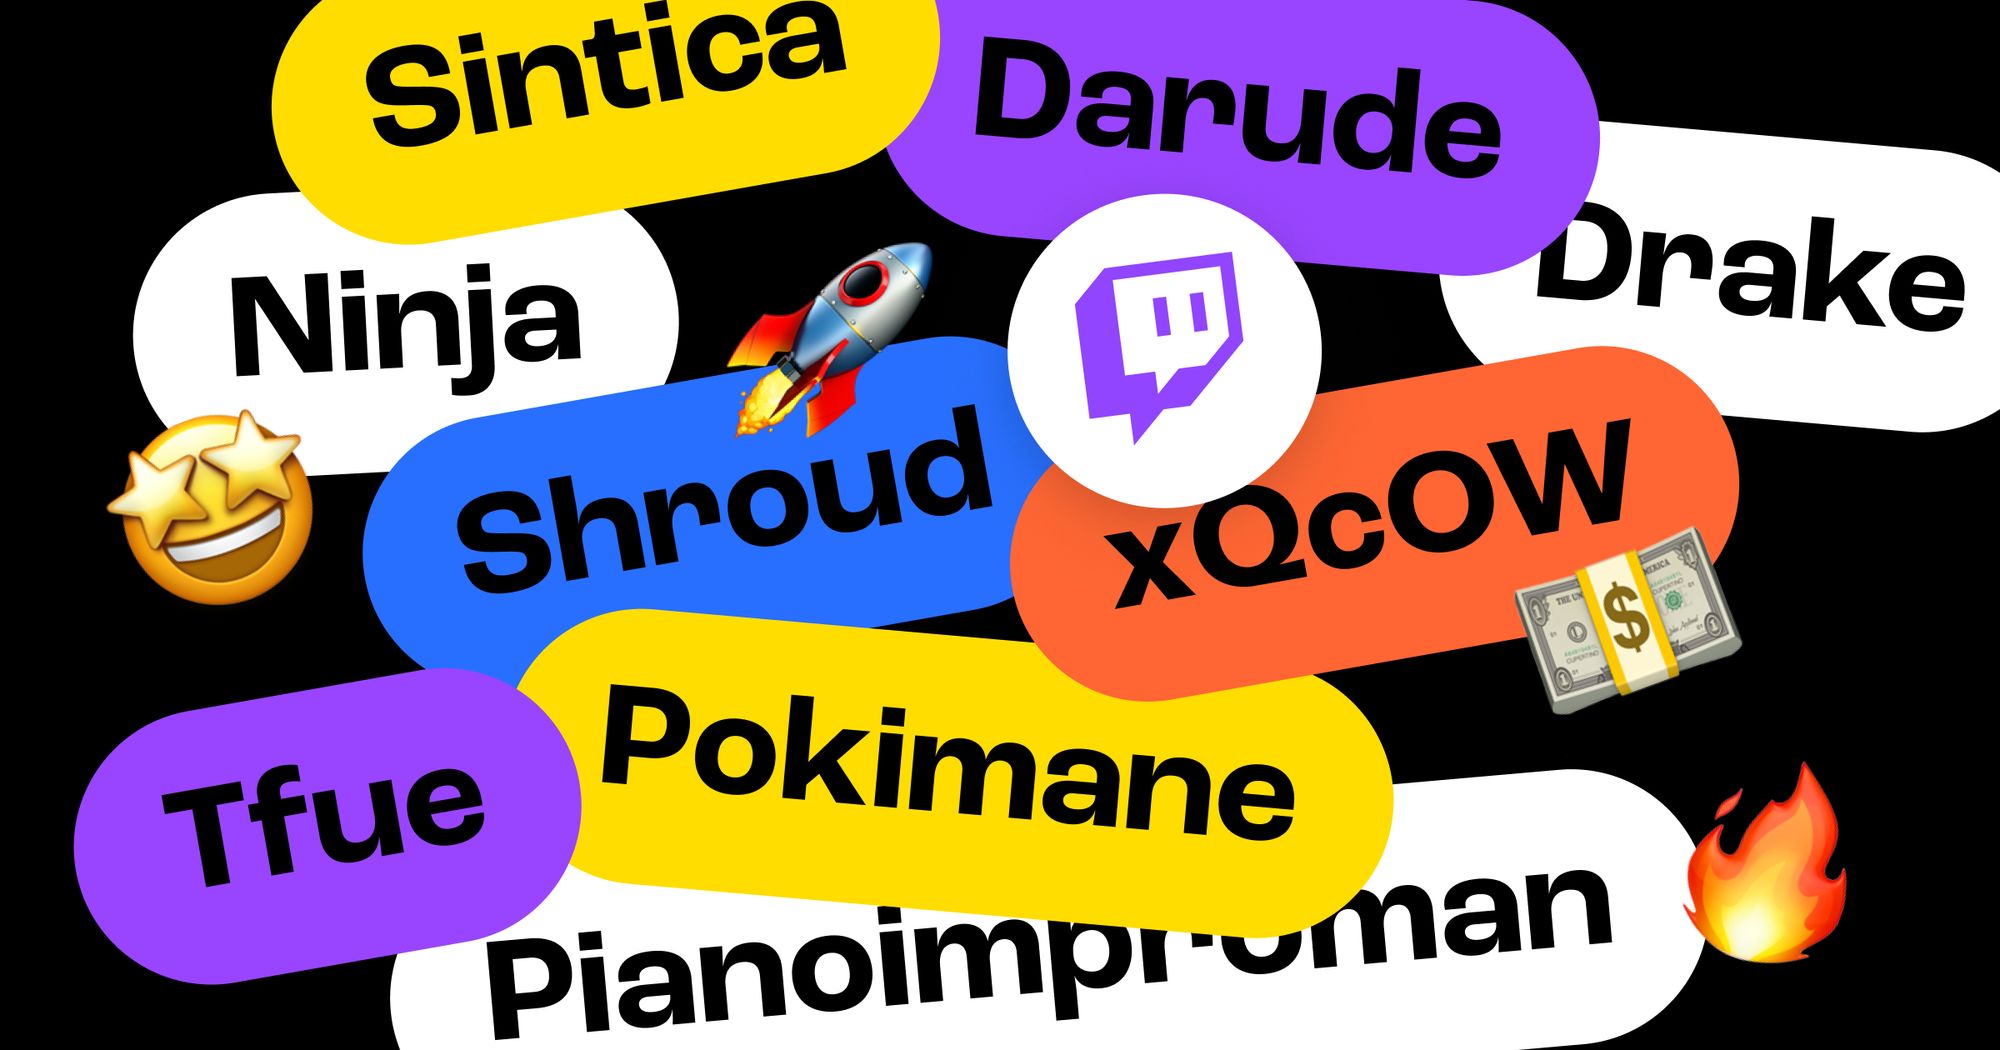 Origin stories of today’s most famous Twitch streamers